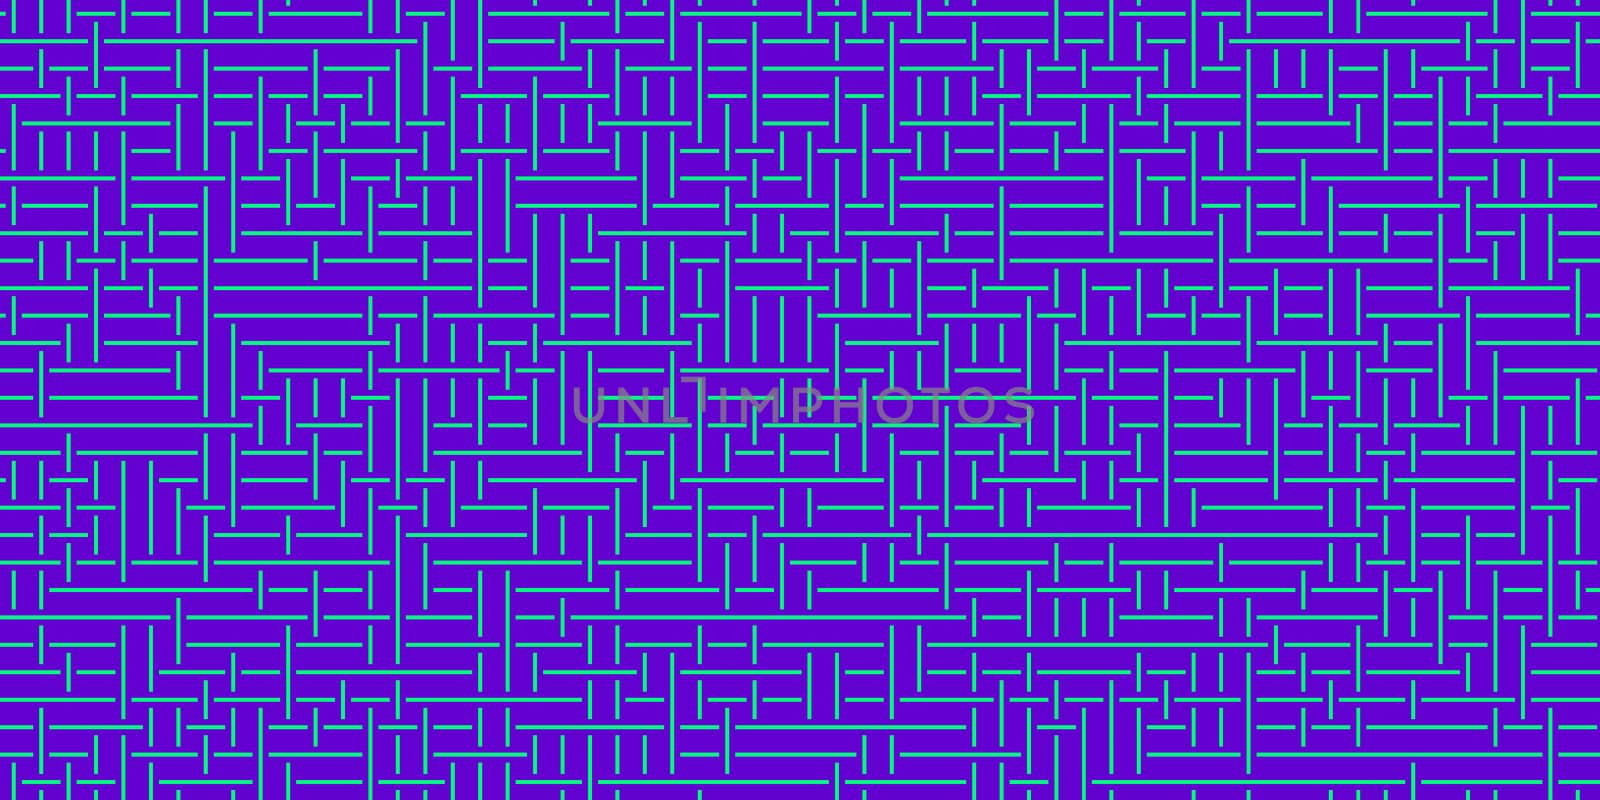 Blue Violet Turquoise Seamless Outline Labyrinth Background. Maze Path Puzzle Concept. Difficulty Logical Mind Creativity Abstraction. by sanches812